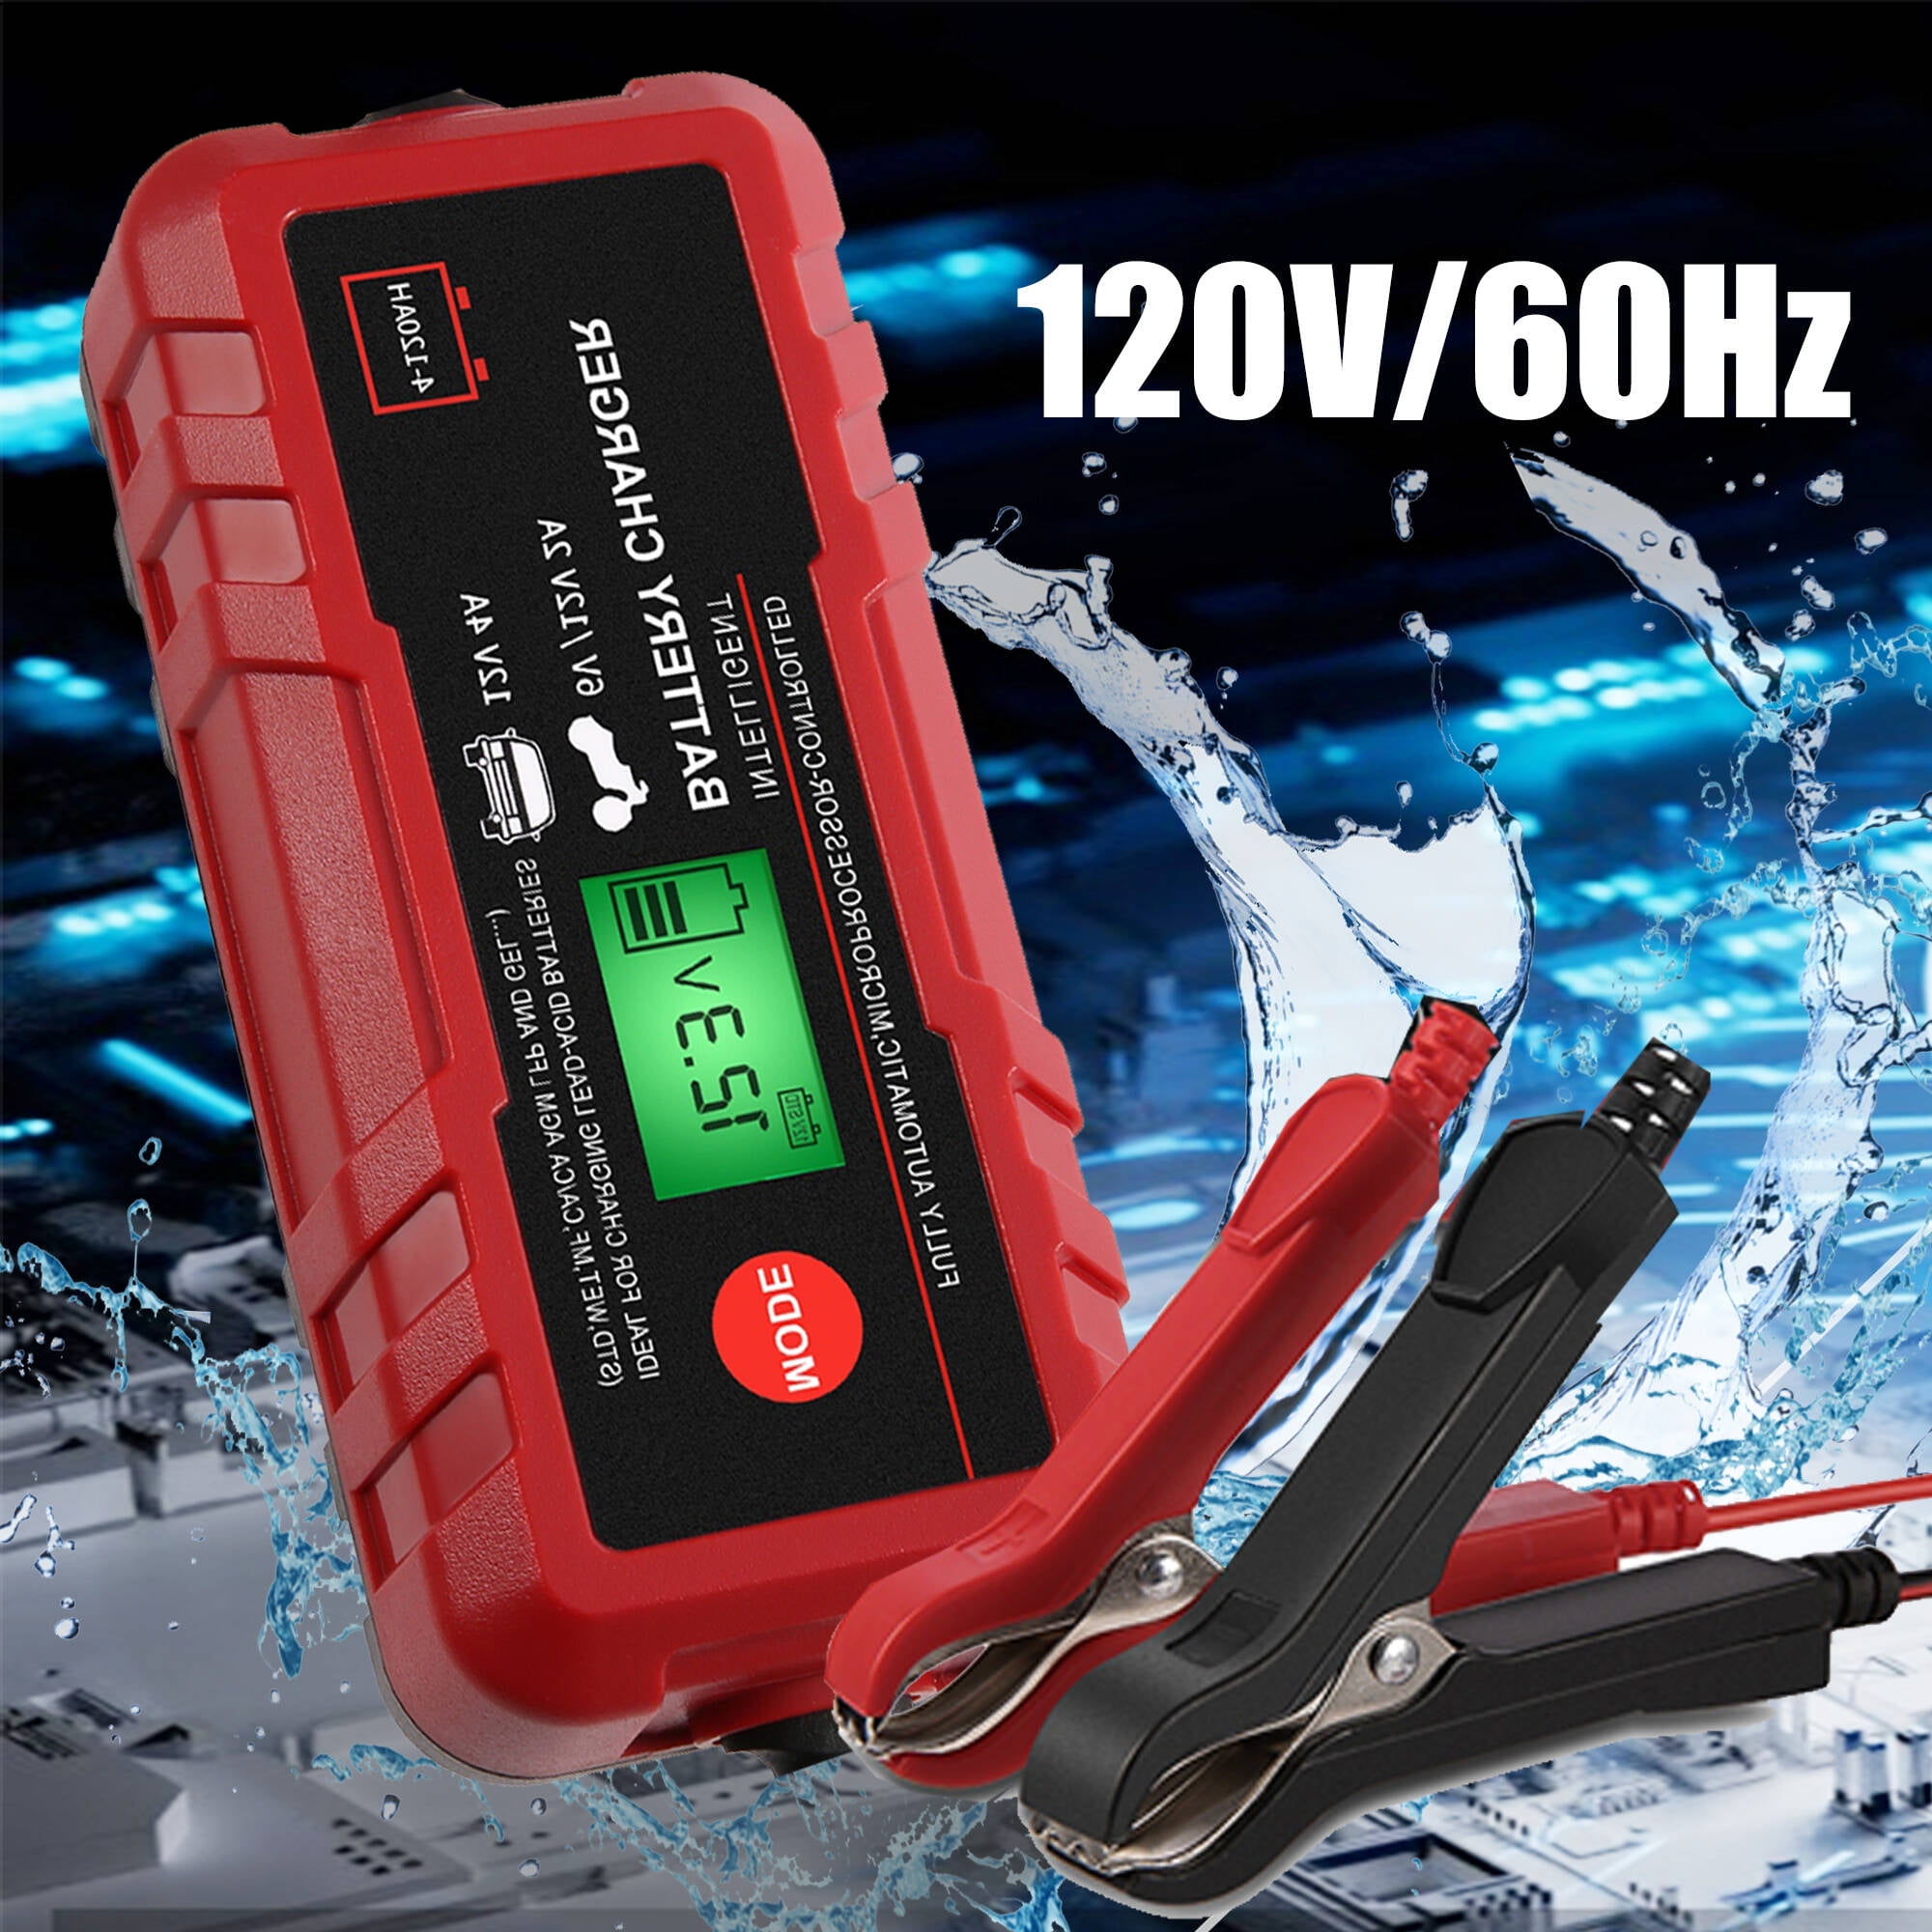 70W Fully Automatic Battery Charger, 6V/12V Lead-Acid Auto Batterys  Charger/Maintainer with LCD Digital Display/IP65 Protection for Car,  Motorcycle